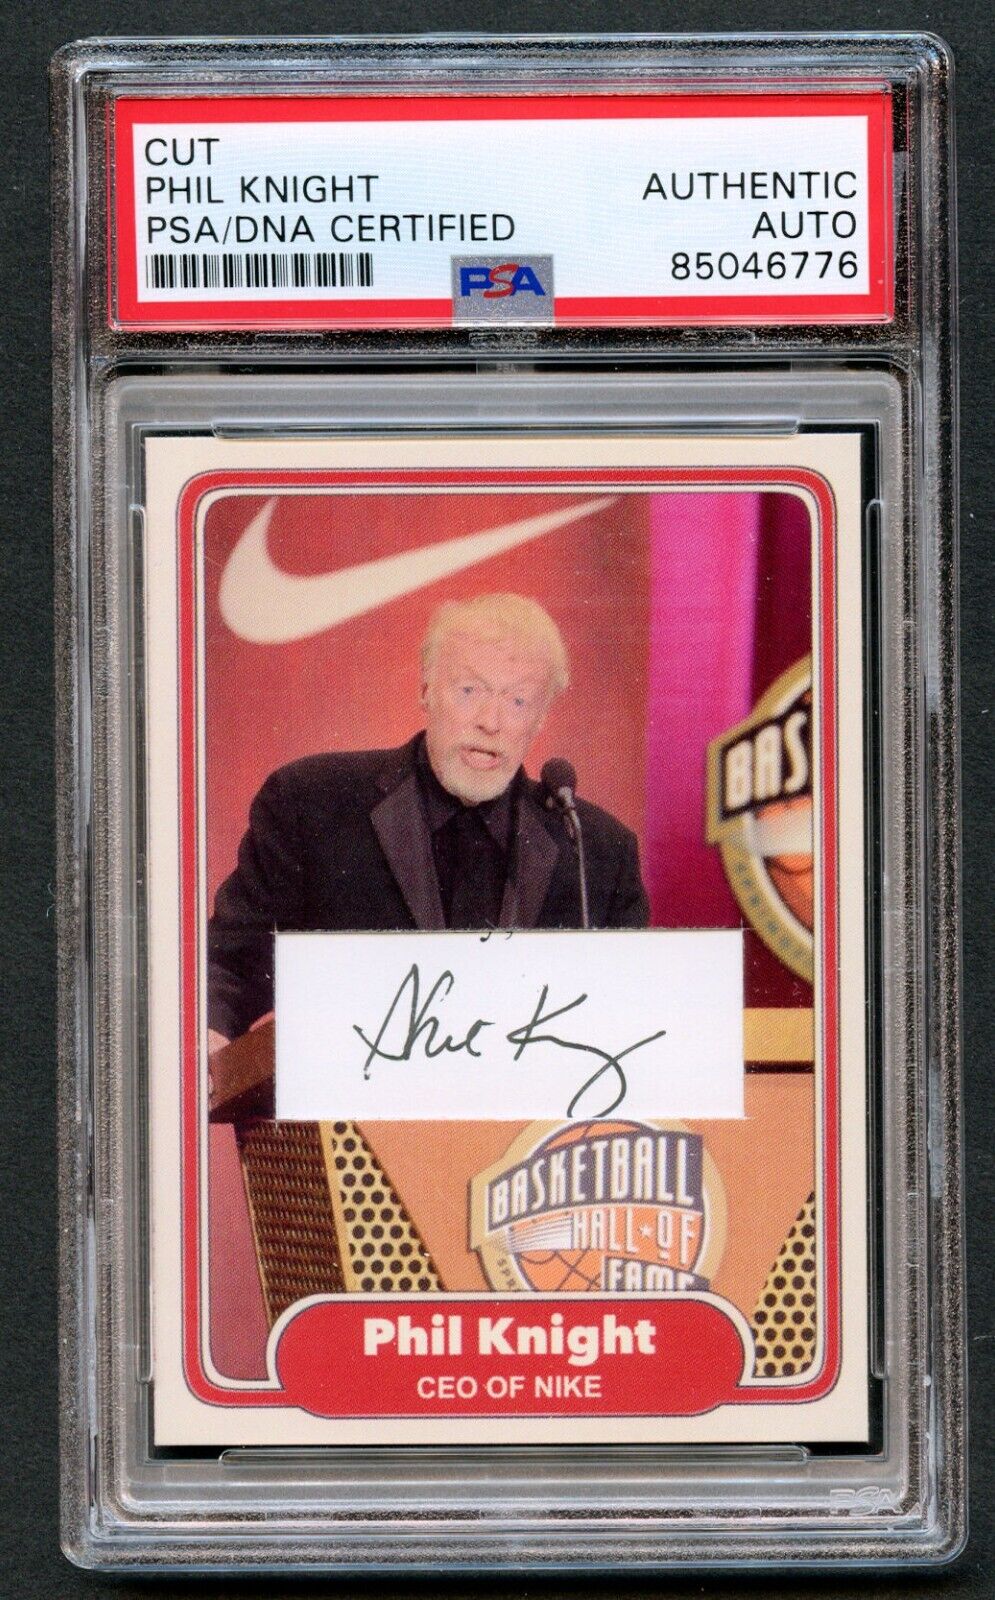 Phil Knight signed autograph auto Custom Cut Card Co-Founder of NIKE PSA Slabbed